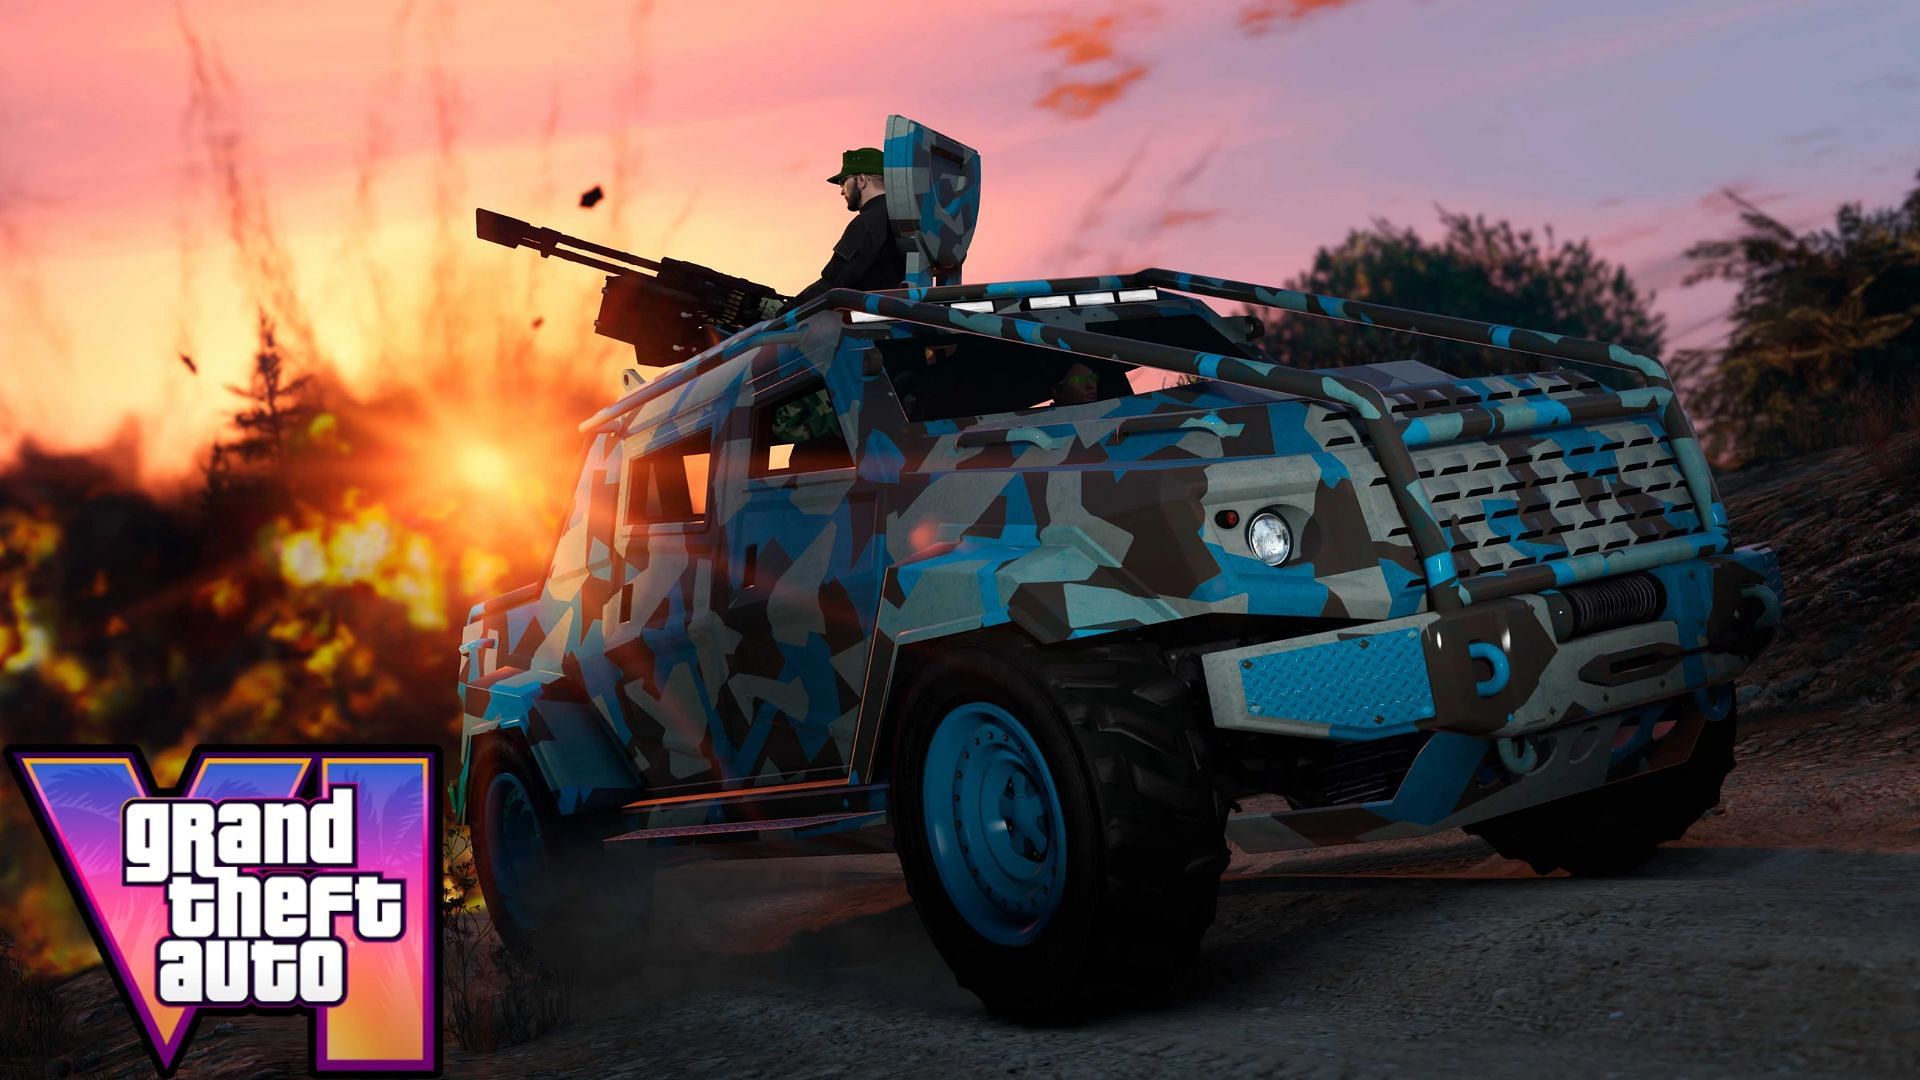 cheapest vehicles that we want to see in GTA 6